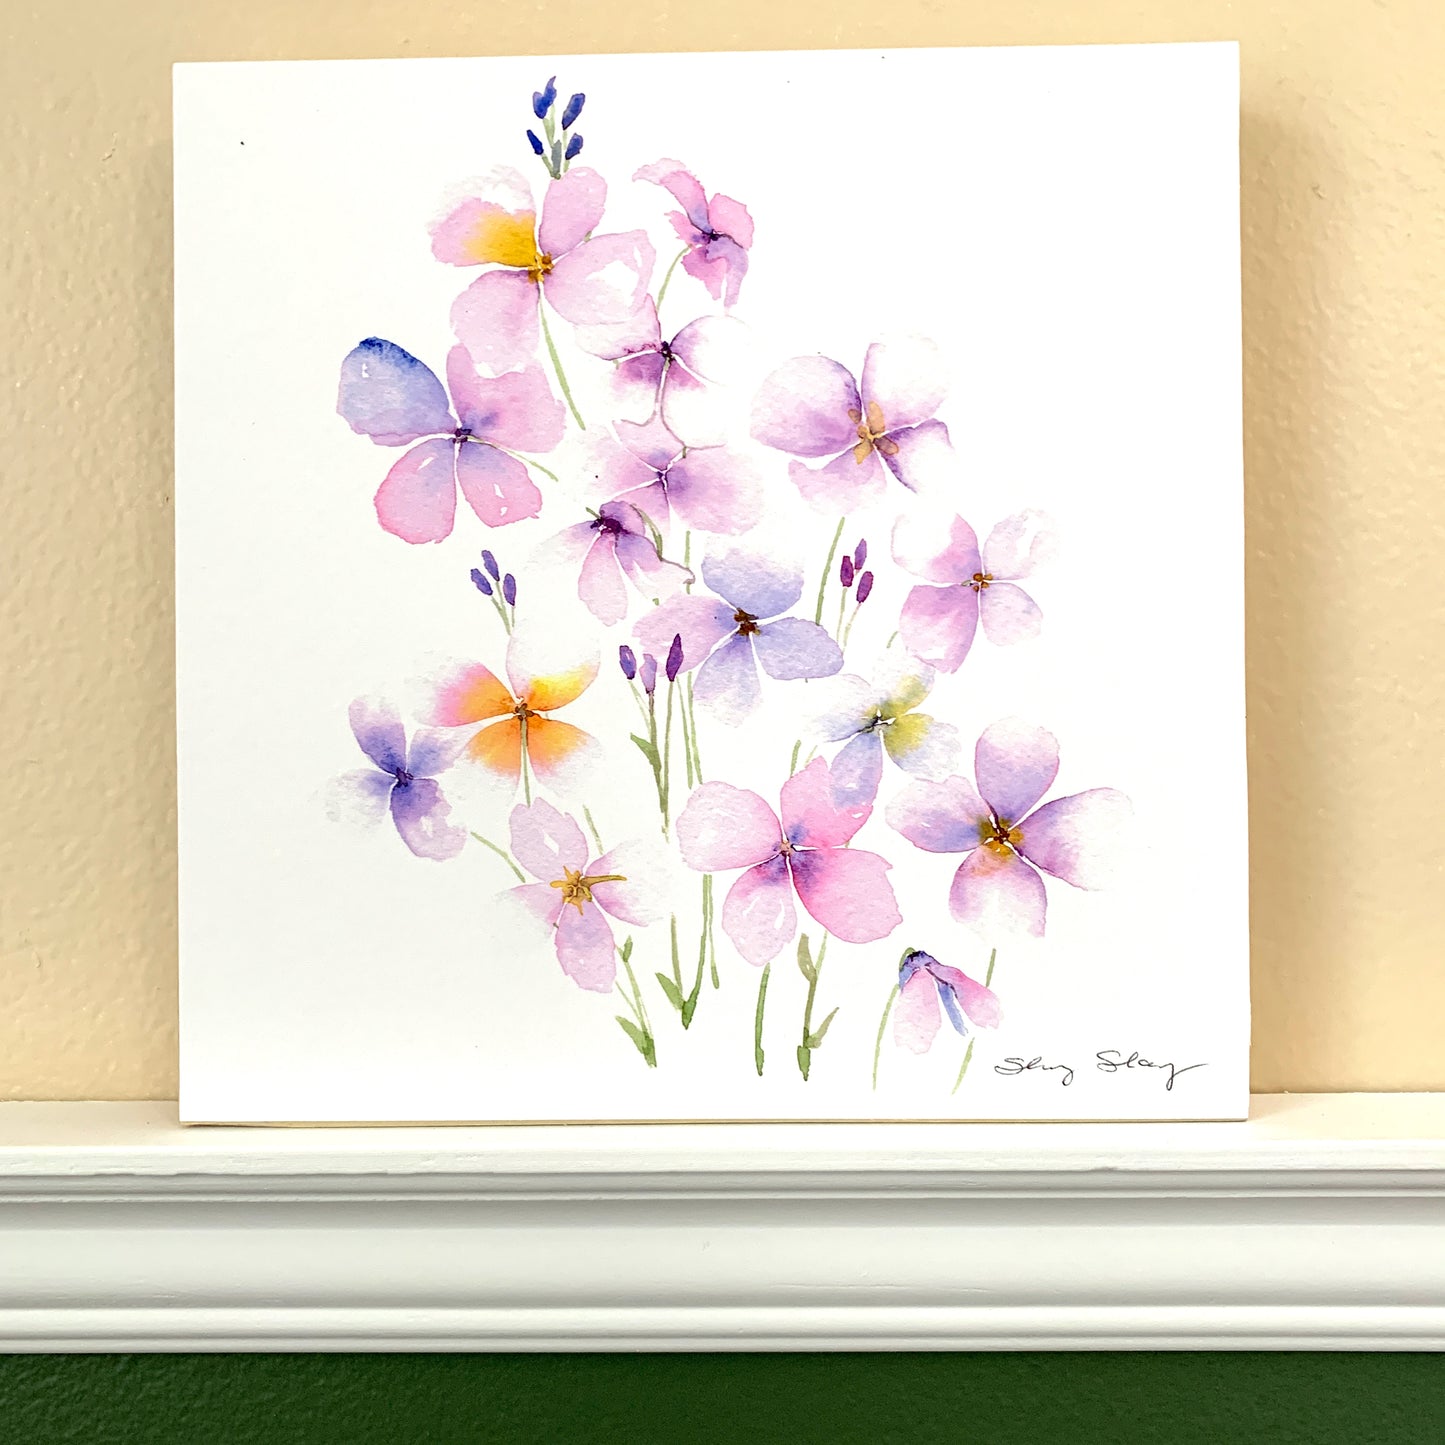 Wildflower Watercolor Print on Wood Block - Flamingo Shores - Original Art for Home Decor and Gifts